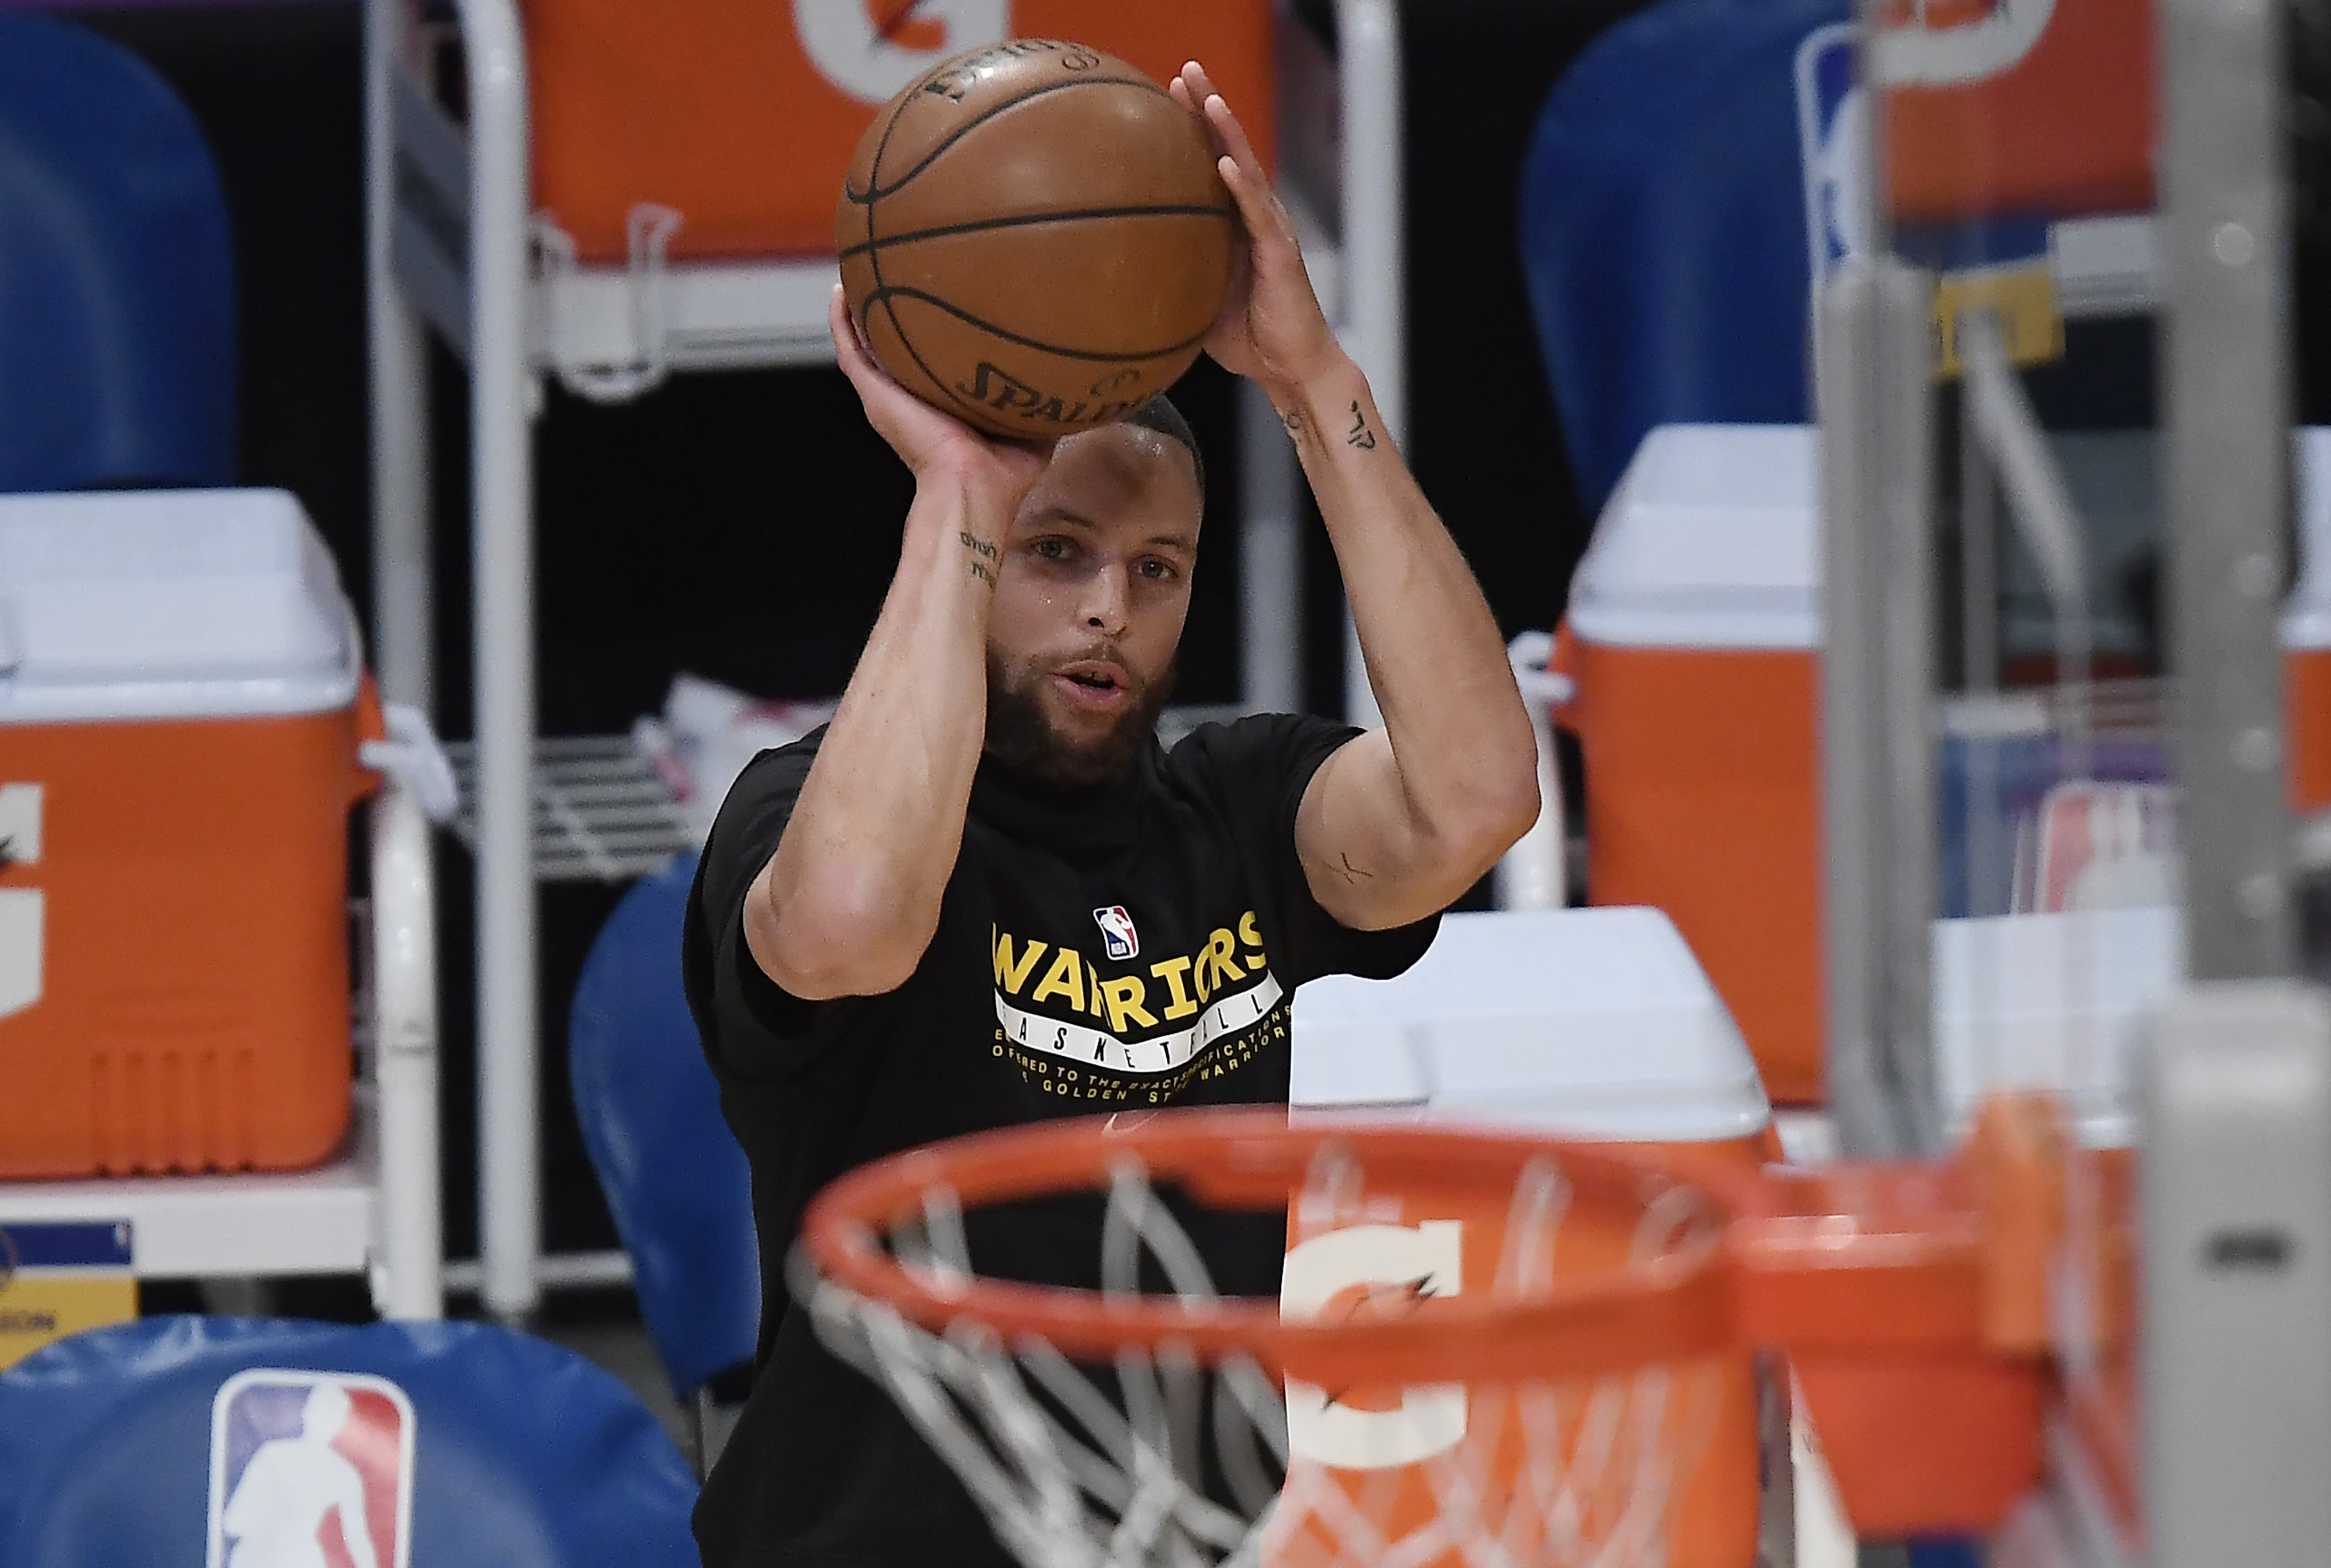 Warriors point guard Stephen Curry warms up before the NBA Play-In Game